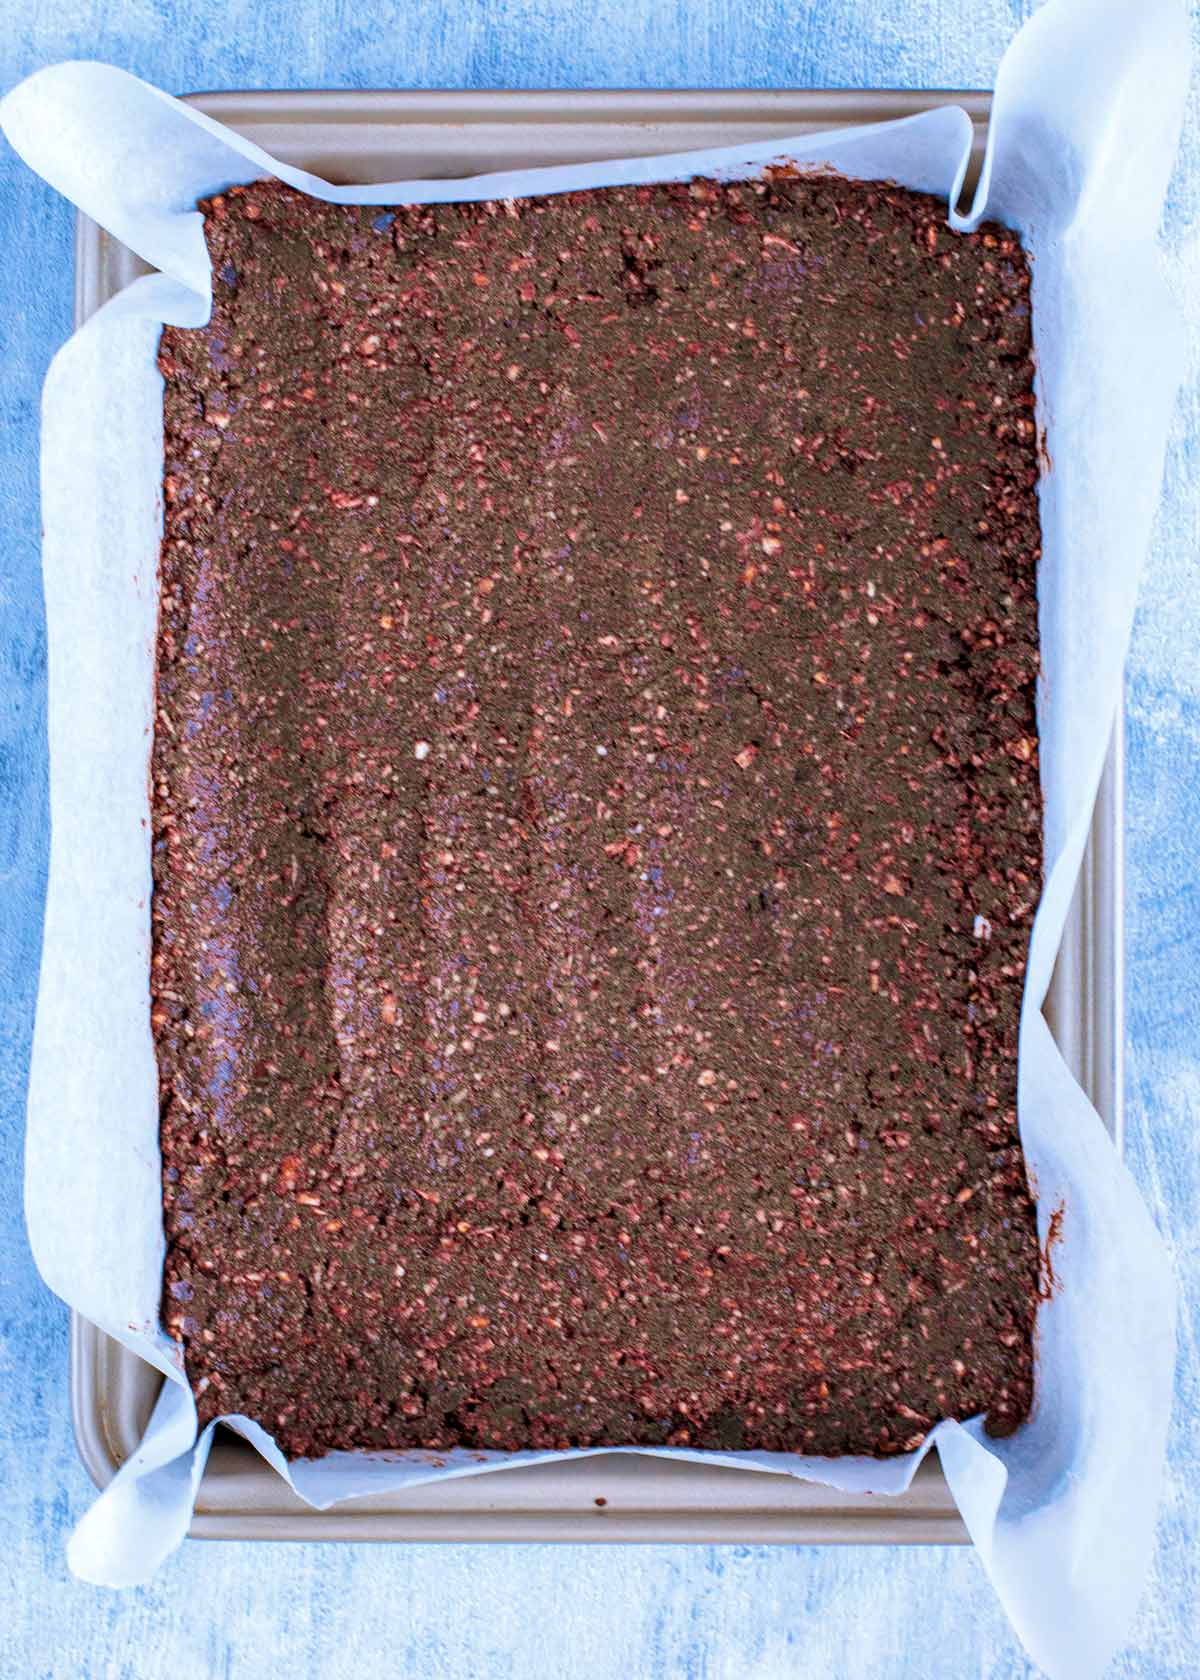 A lined brownie tin with a chocolate crumb base pressed into it.